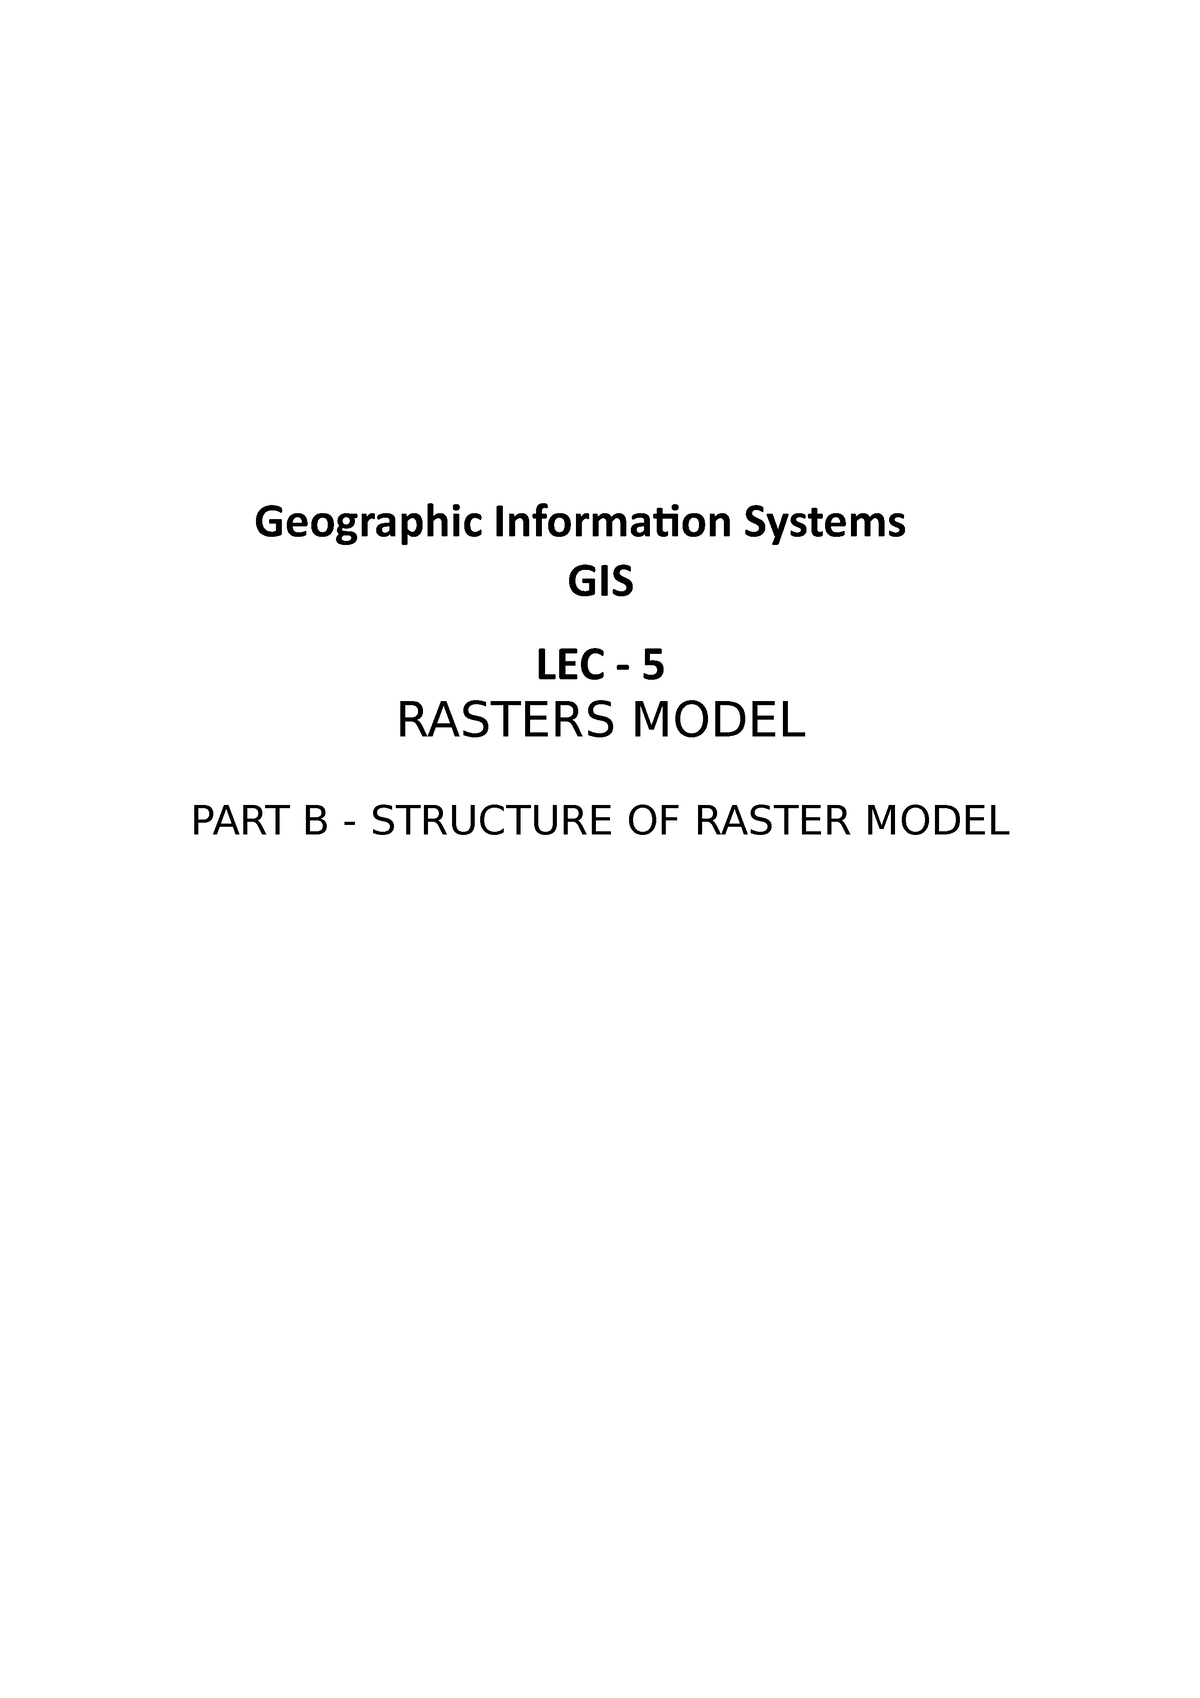 gis-geographic-information-systems-lec-5-part-b-geographic-information-systems-gis-lec-5